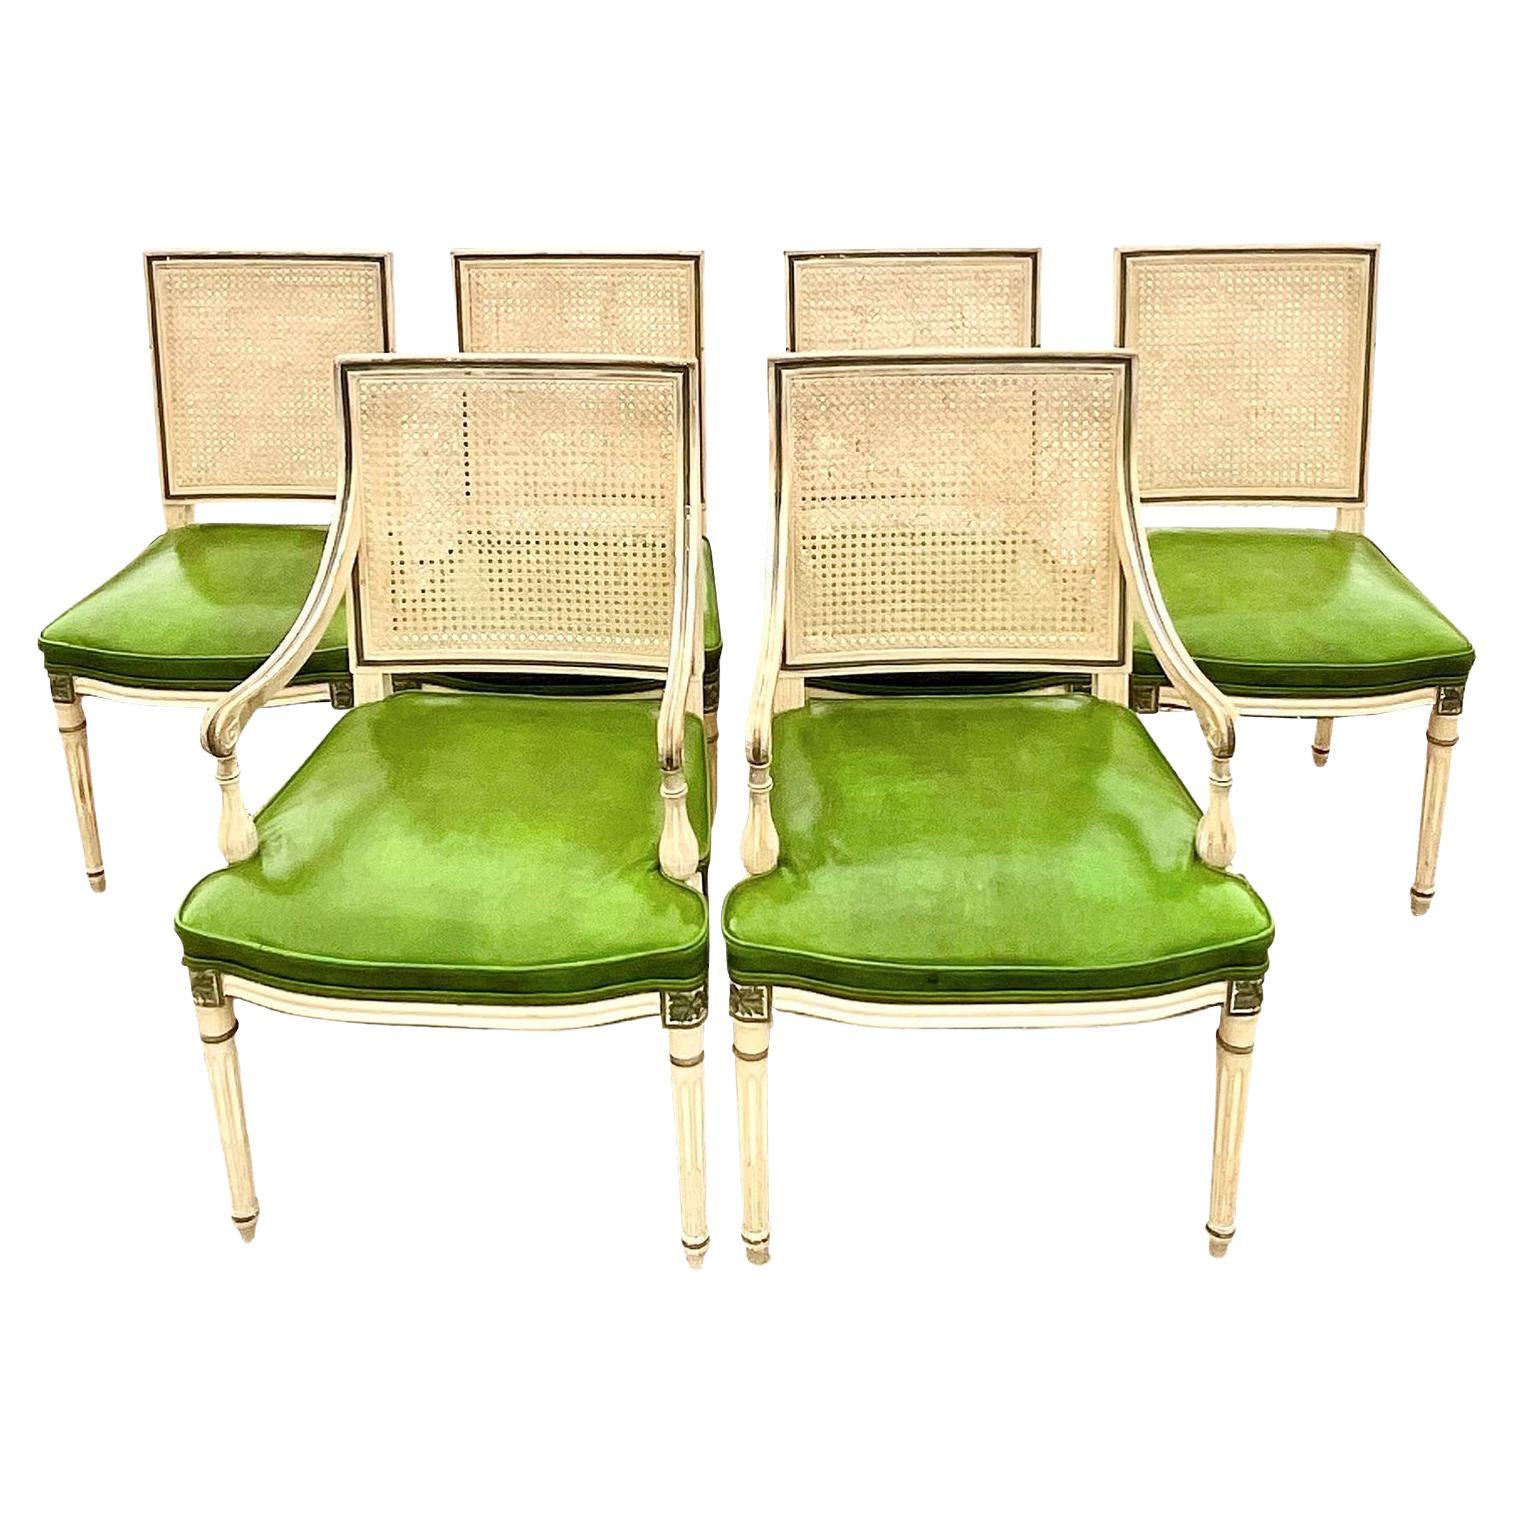 Vintage Regency Painted Cane Back Dining Chairs, Set of 6